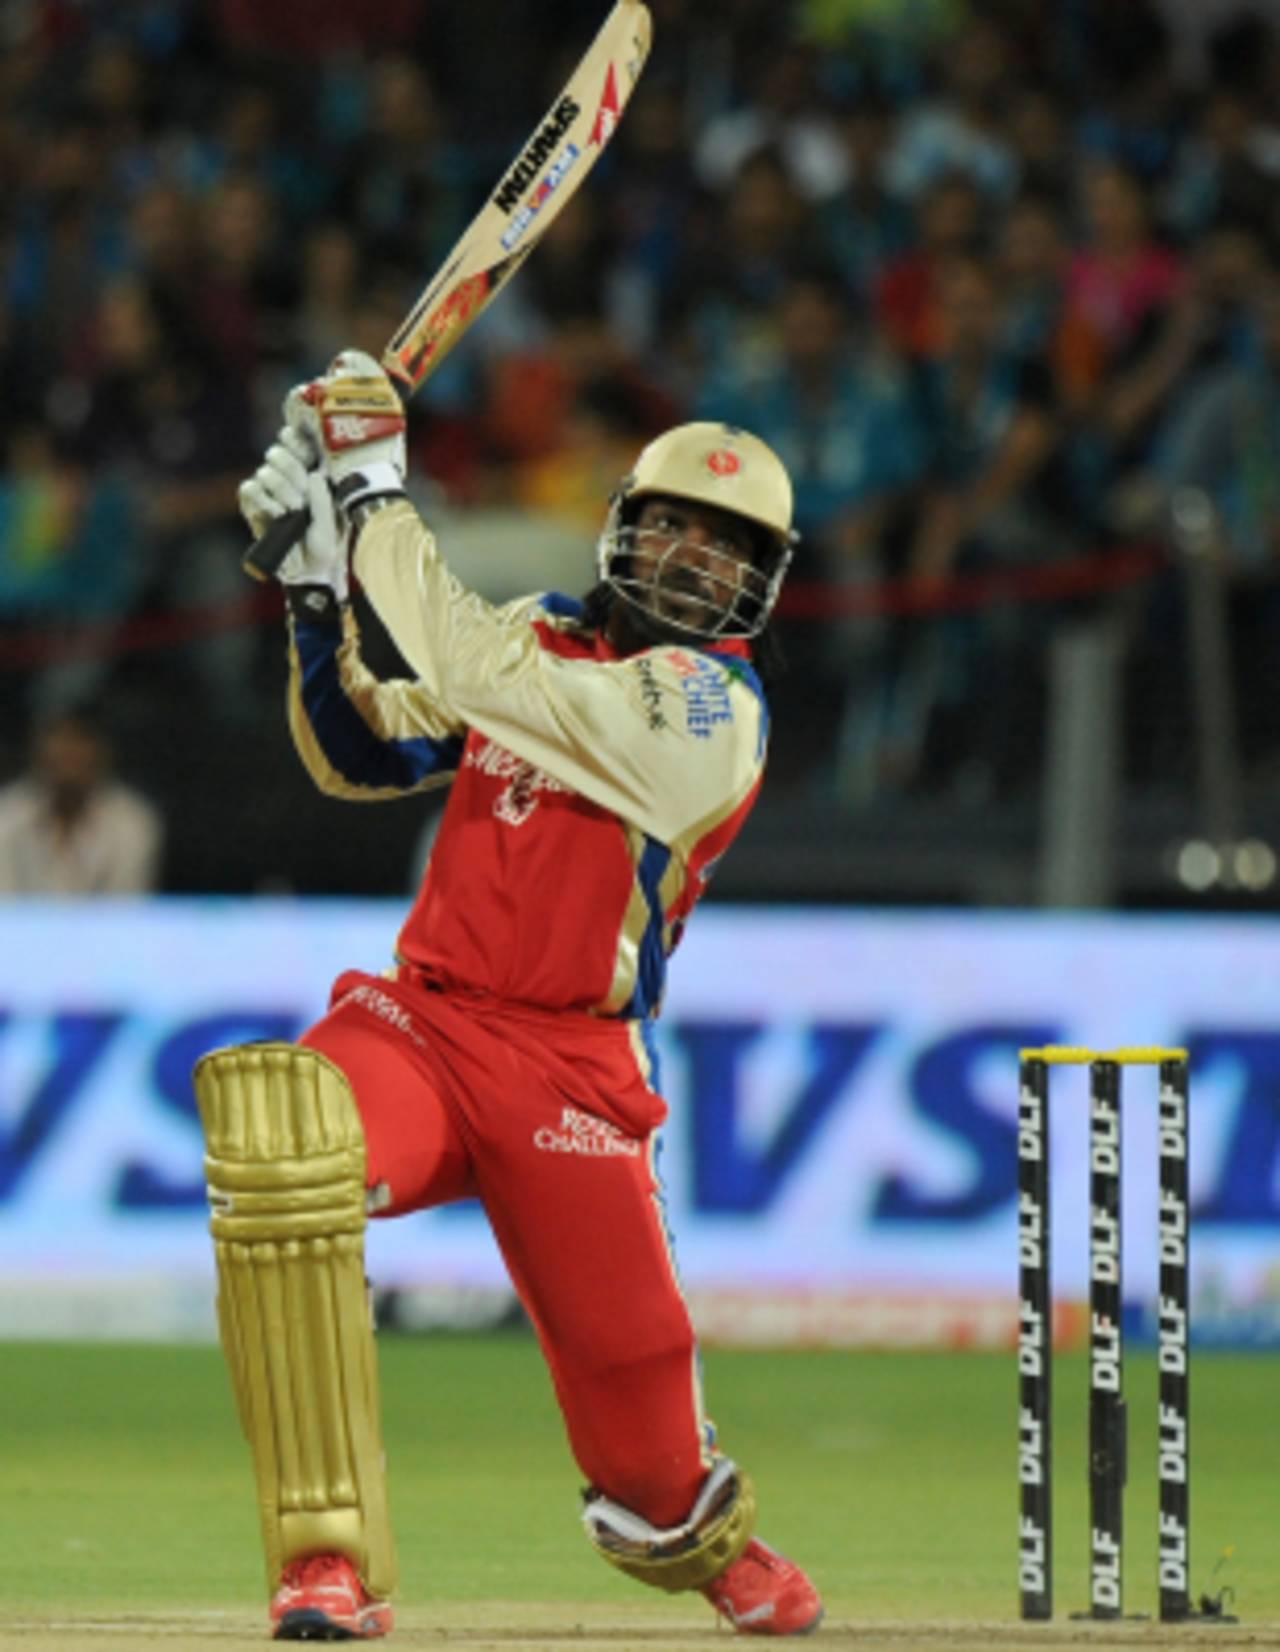 Chris Gayle smashed six sixes in his half-century, Pune Warriors v Royal Challengers Bangalore, IPL, Pune, May 11, 2012